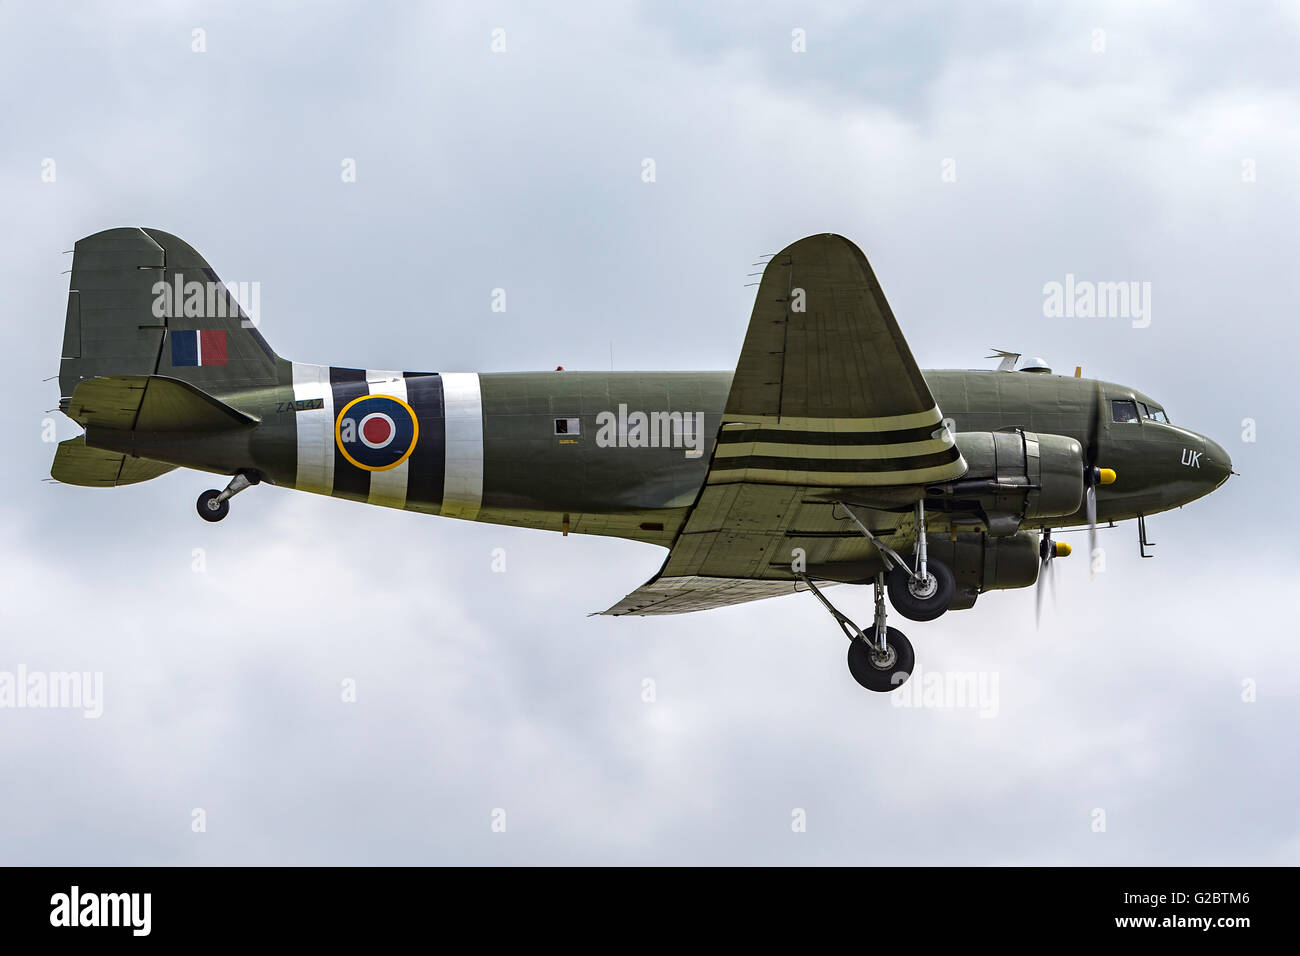 Douglas C-47 Dakota transport aircraft from the Royal Air Force Battle of Britain Memorial Flight based at RAF Coningsby Stock Photo